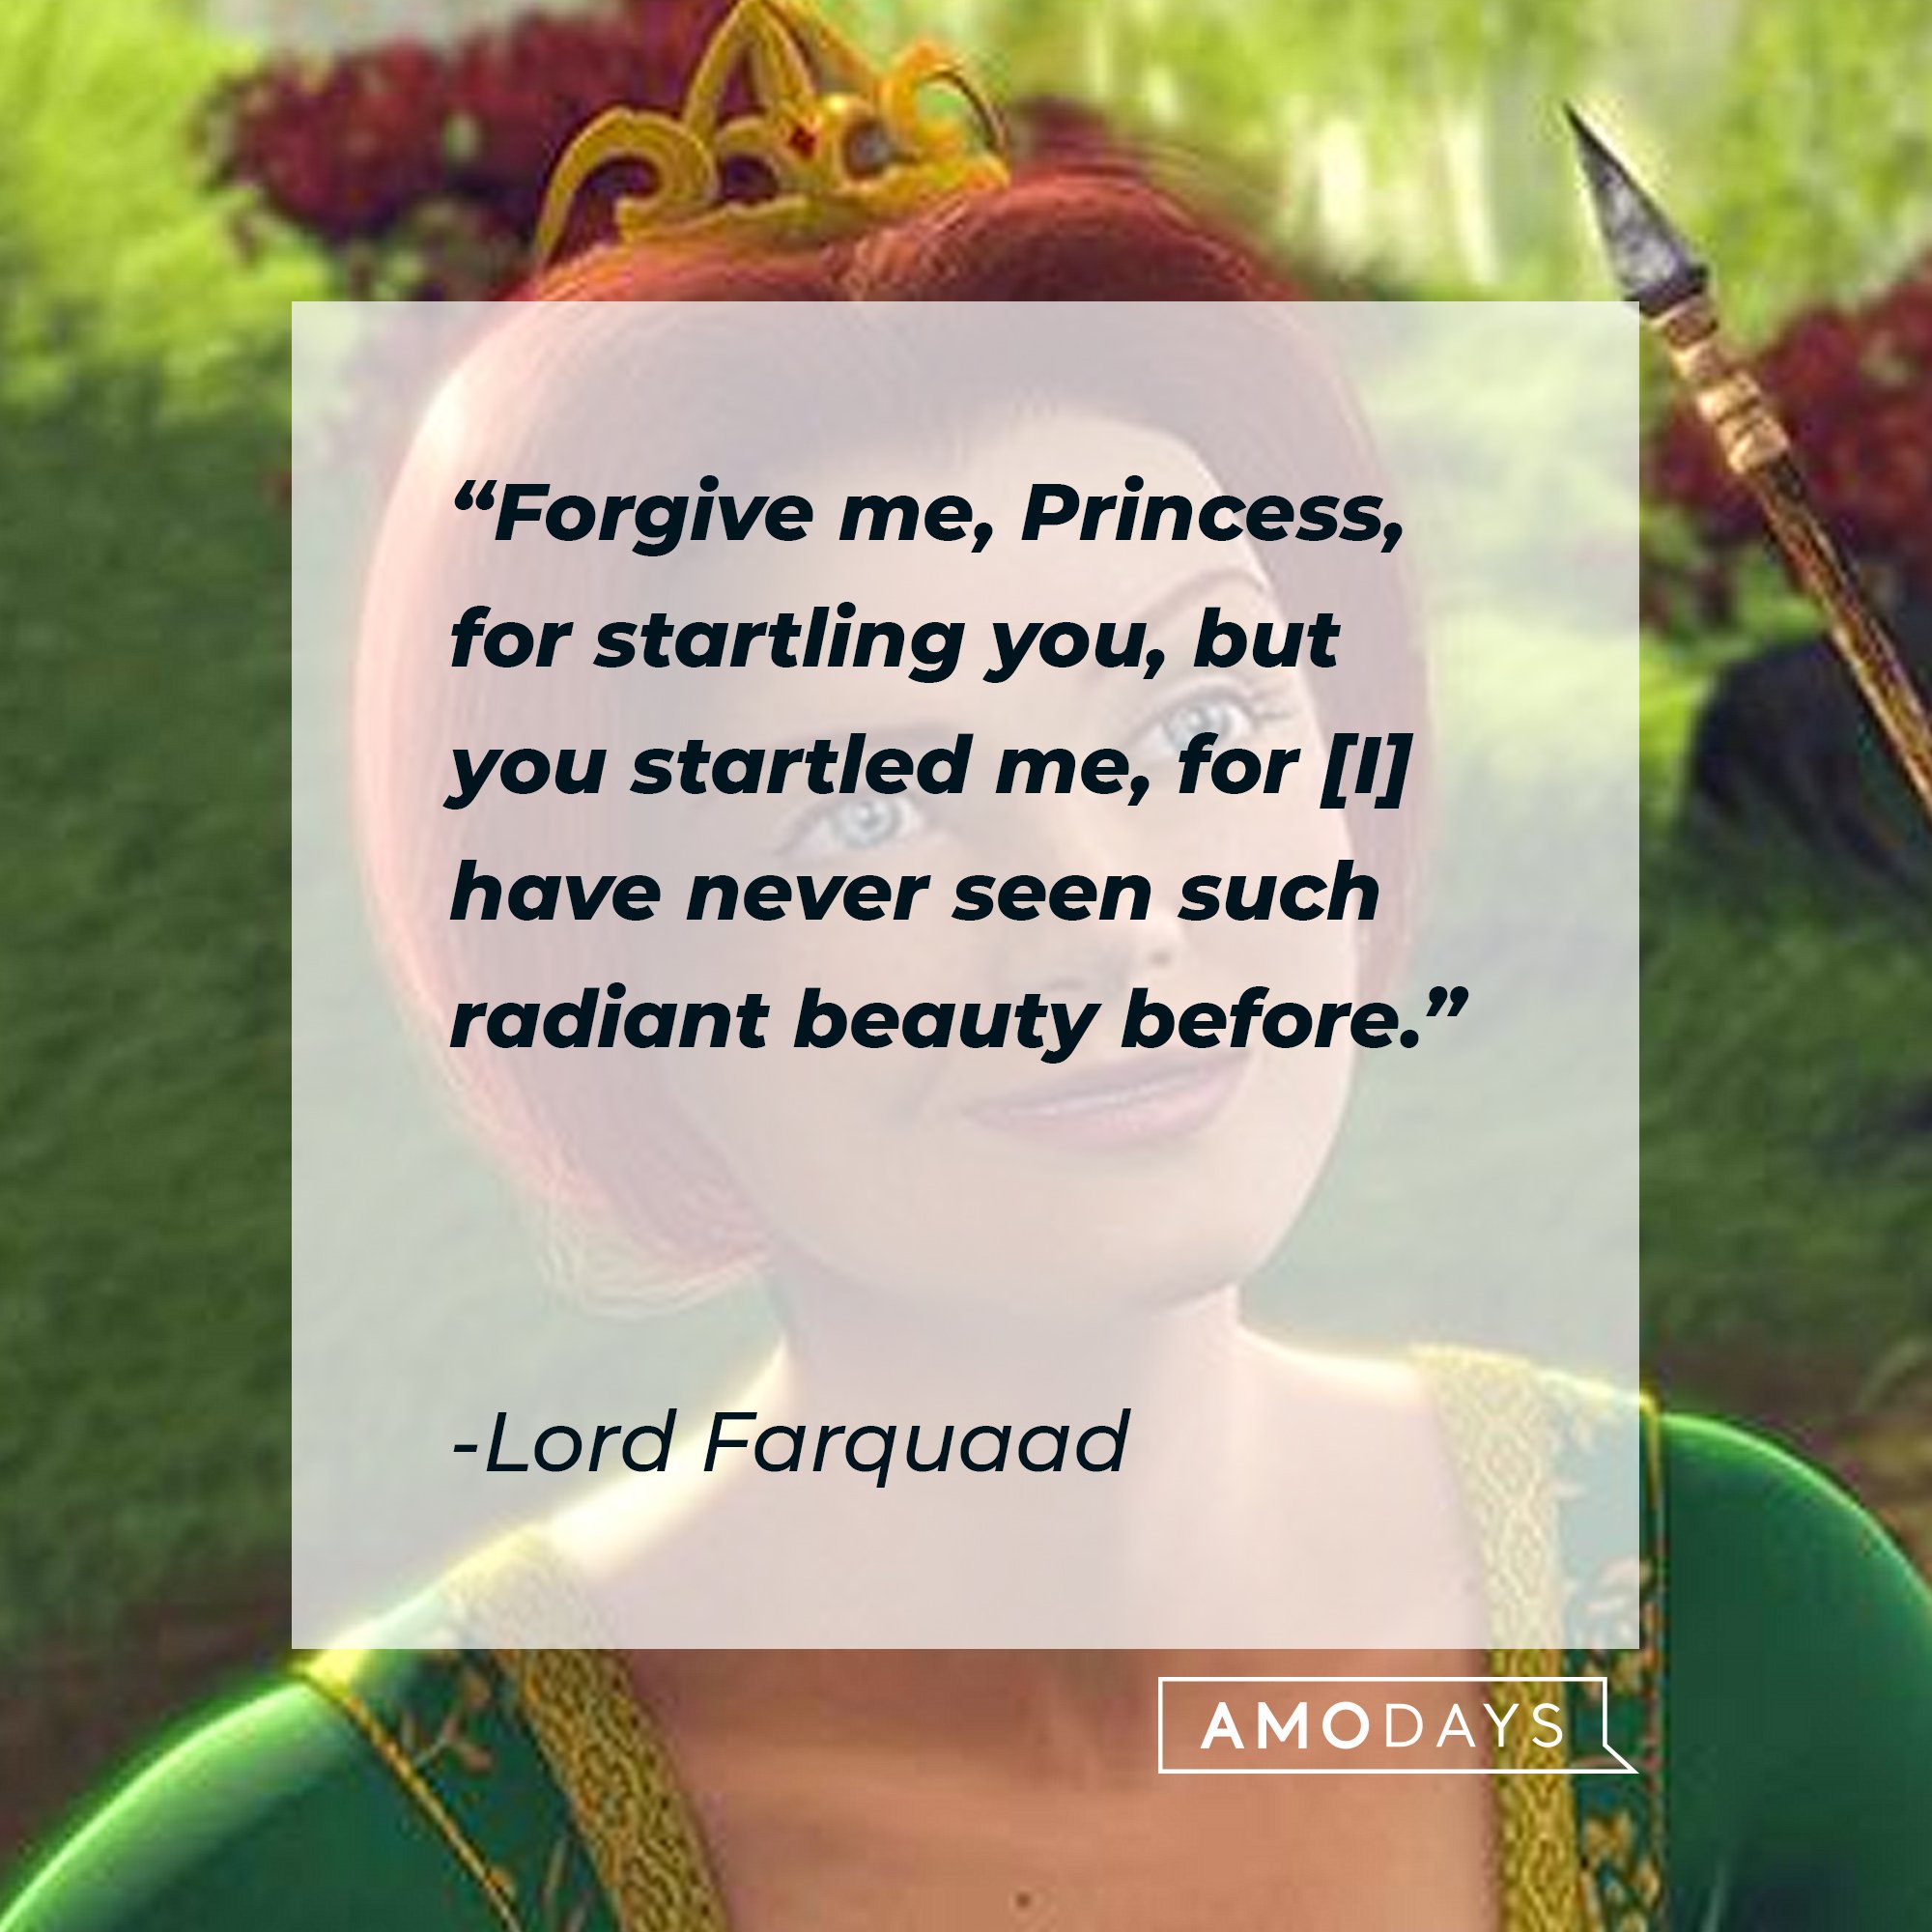 Lord Farquaad's quote: "Forgive me, Princess, for startling you, but you startled me, for [I] have never seen such radiant beauty before." | Image: AmoDays 